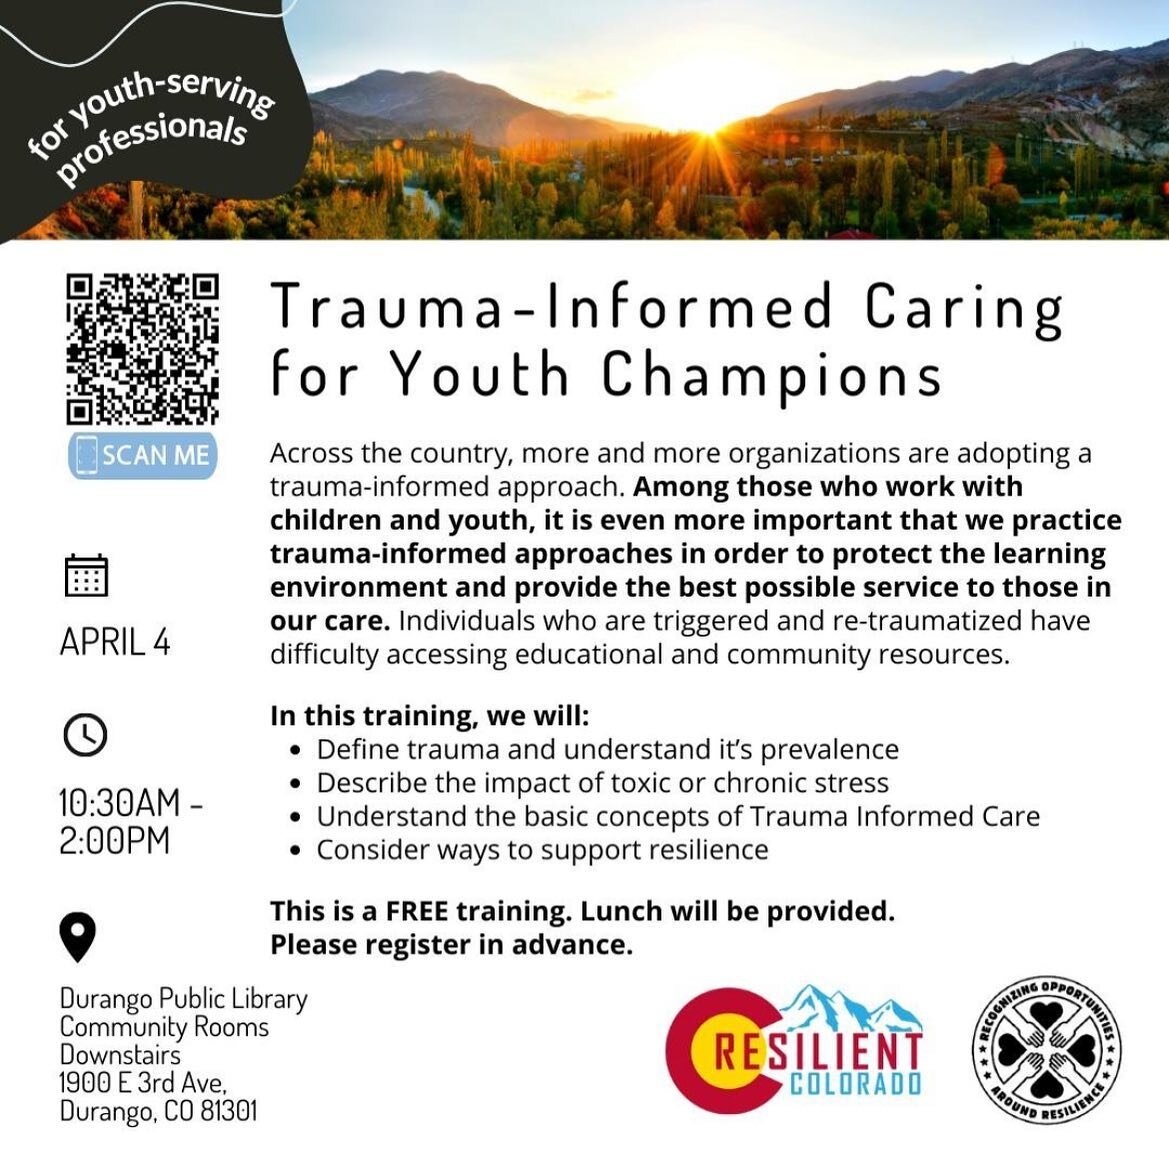 There is still time to register and join us for this FREE ROAR Coalition event for coalition members, community members, and other youth-serving professionals.

You can register at the link in our bio @resilientcolorado 

Trauma-informed schools and 